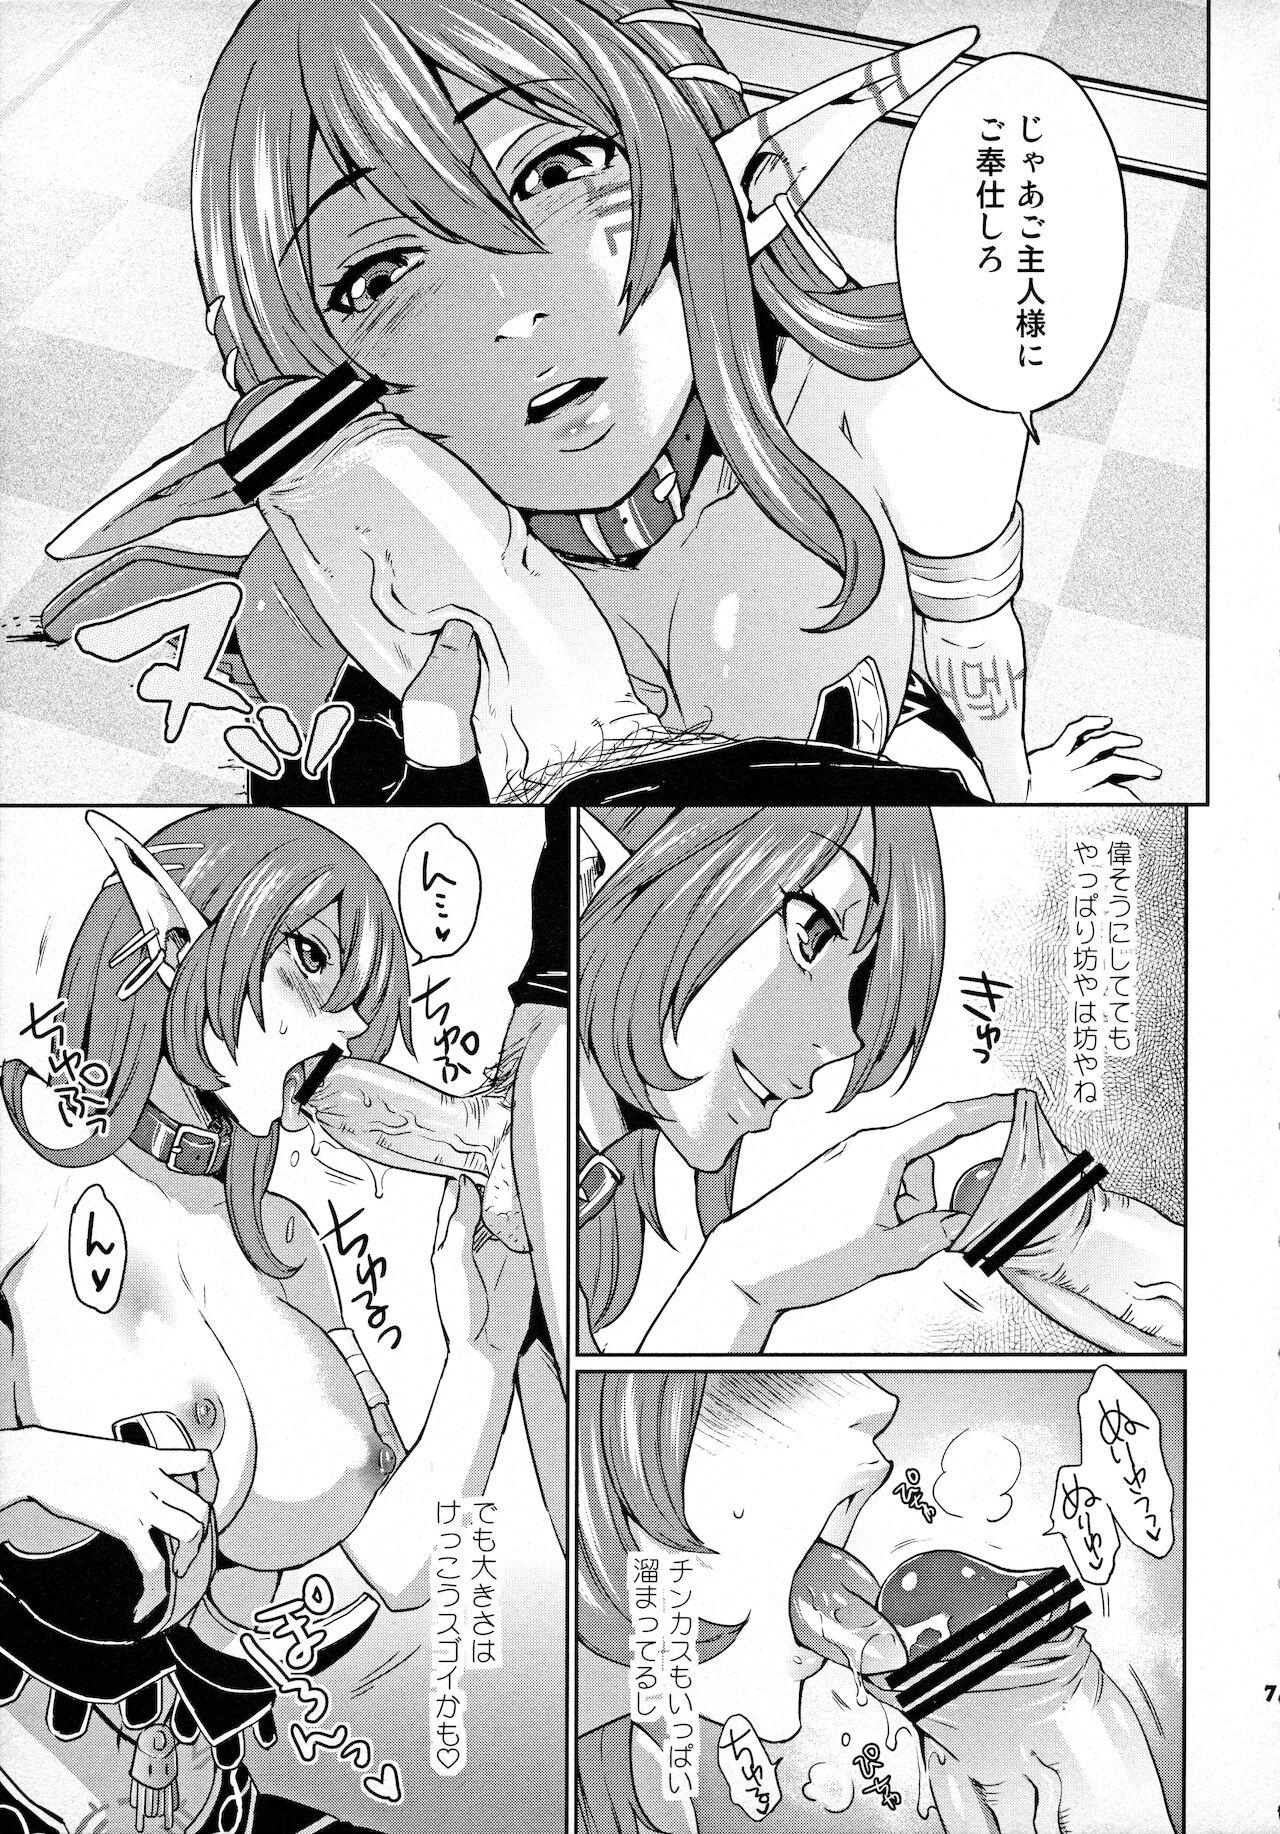 Oral Sex Porn Hoshi no Umi no Miboujin - The Widow of The Star Ocean - Star ocean 4 Bwc - Page 6